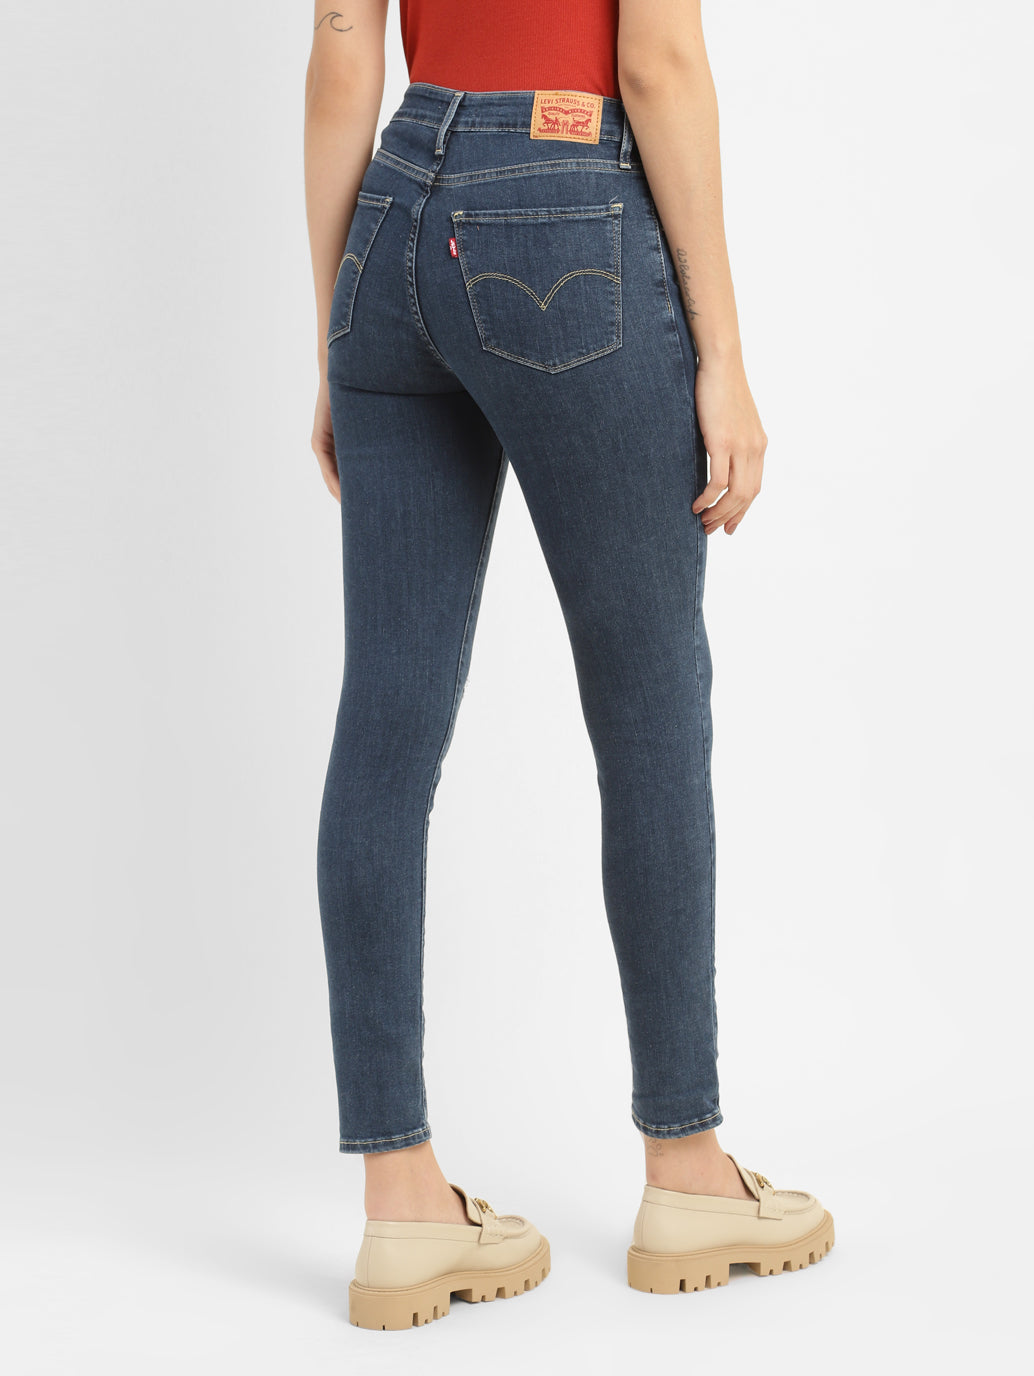 Women's High Rise 721 Skinny Fit Jeans